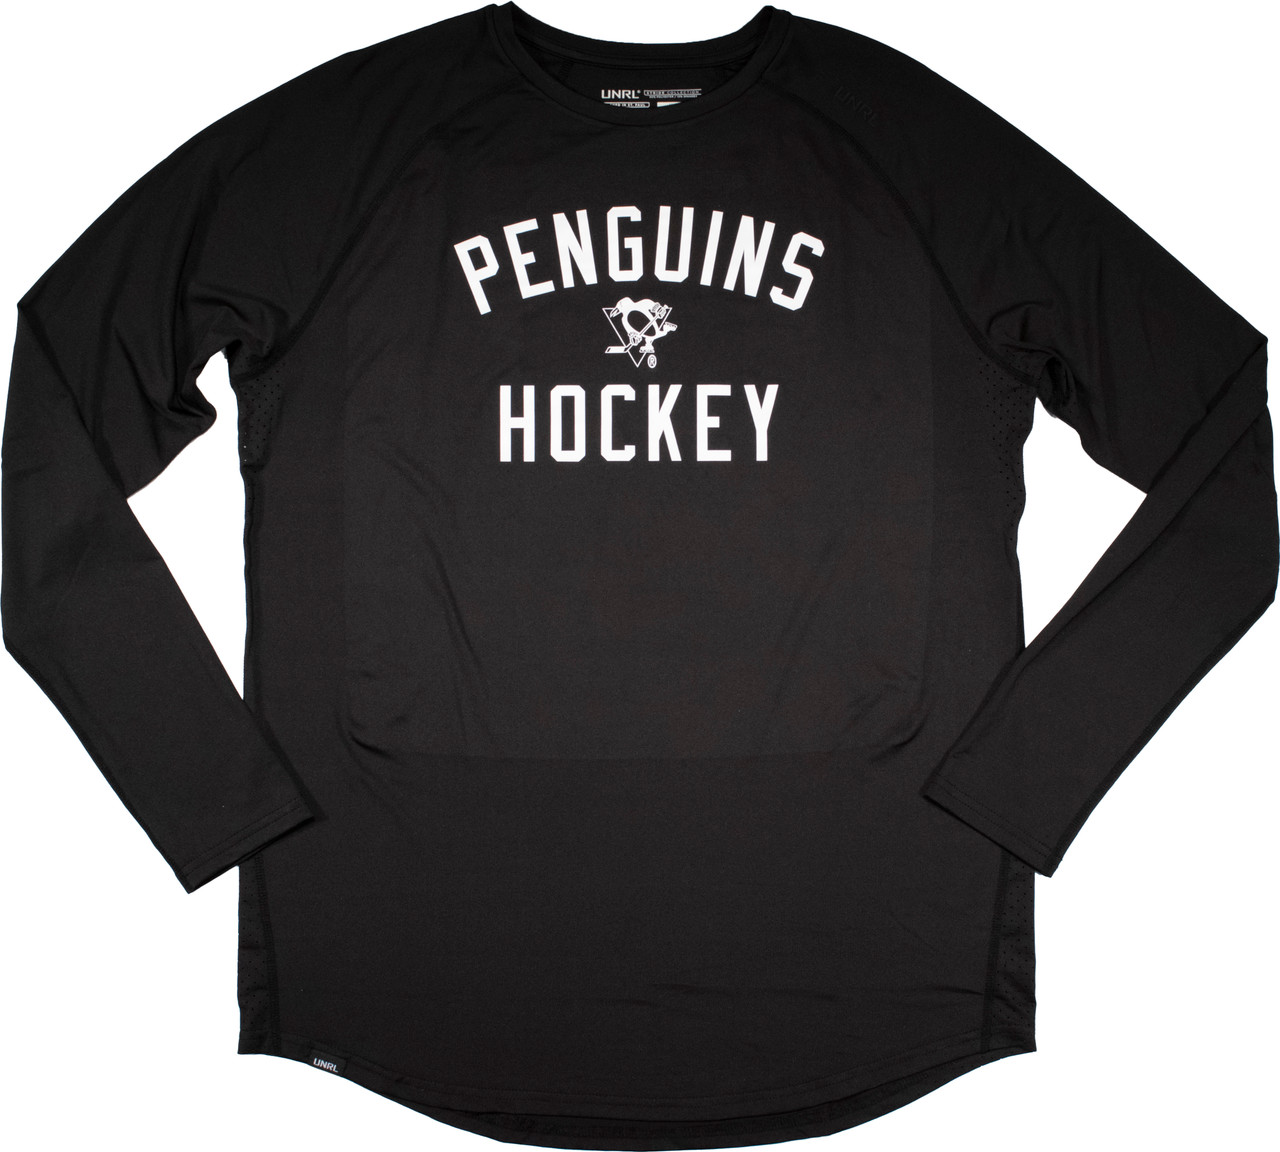 PITTSBURGH PENGUINS- Long-Sleeved Ivy League T-Shirt